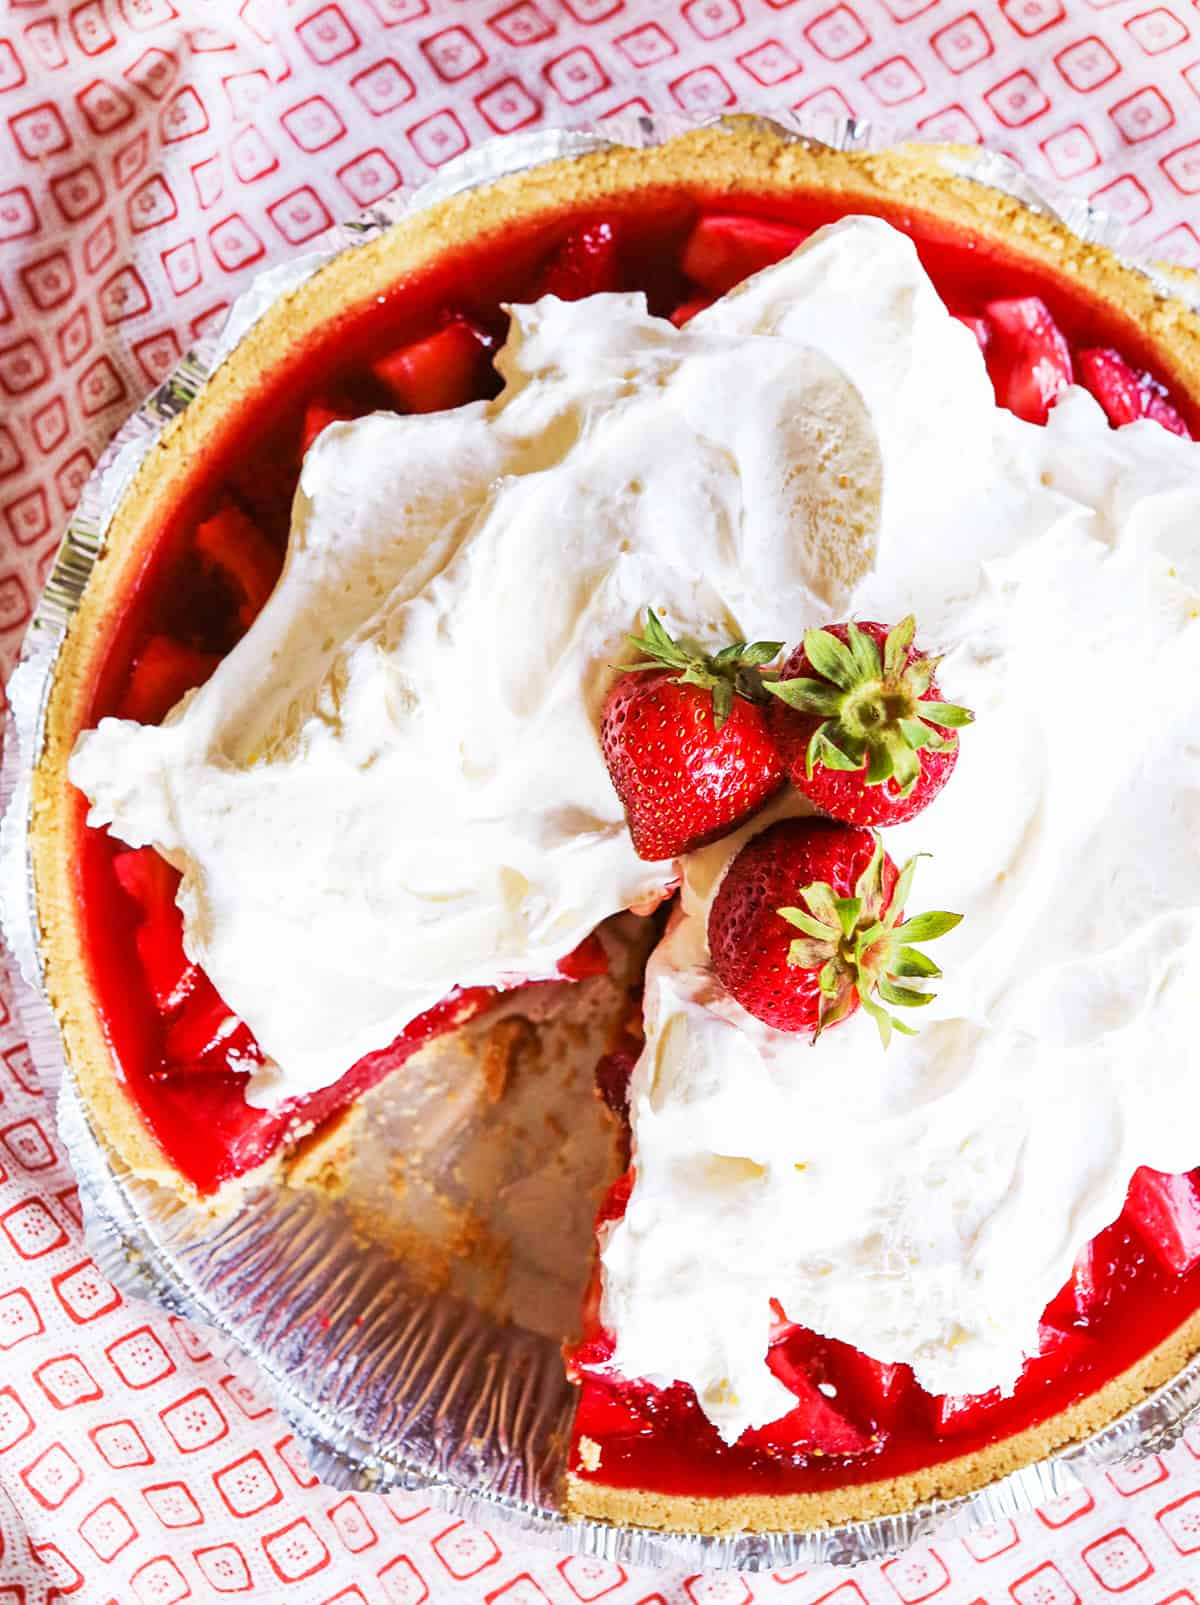 Top view of no bake strawberry pie topped with whipped cream and strawberries.